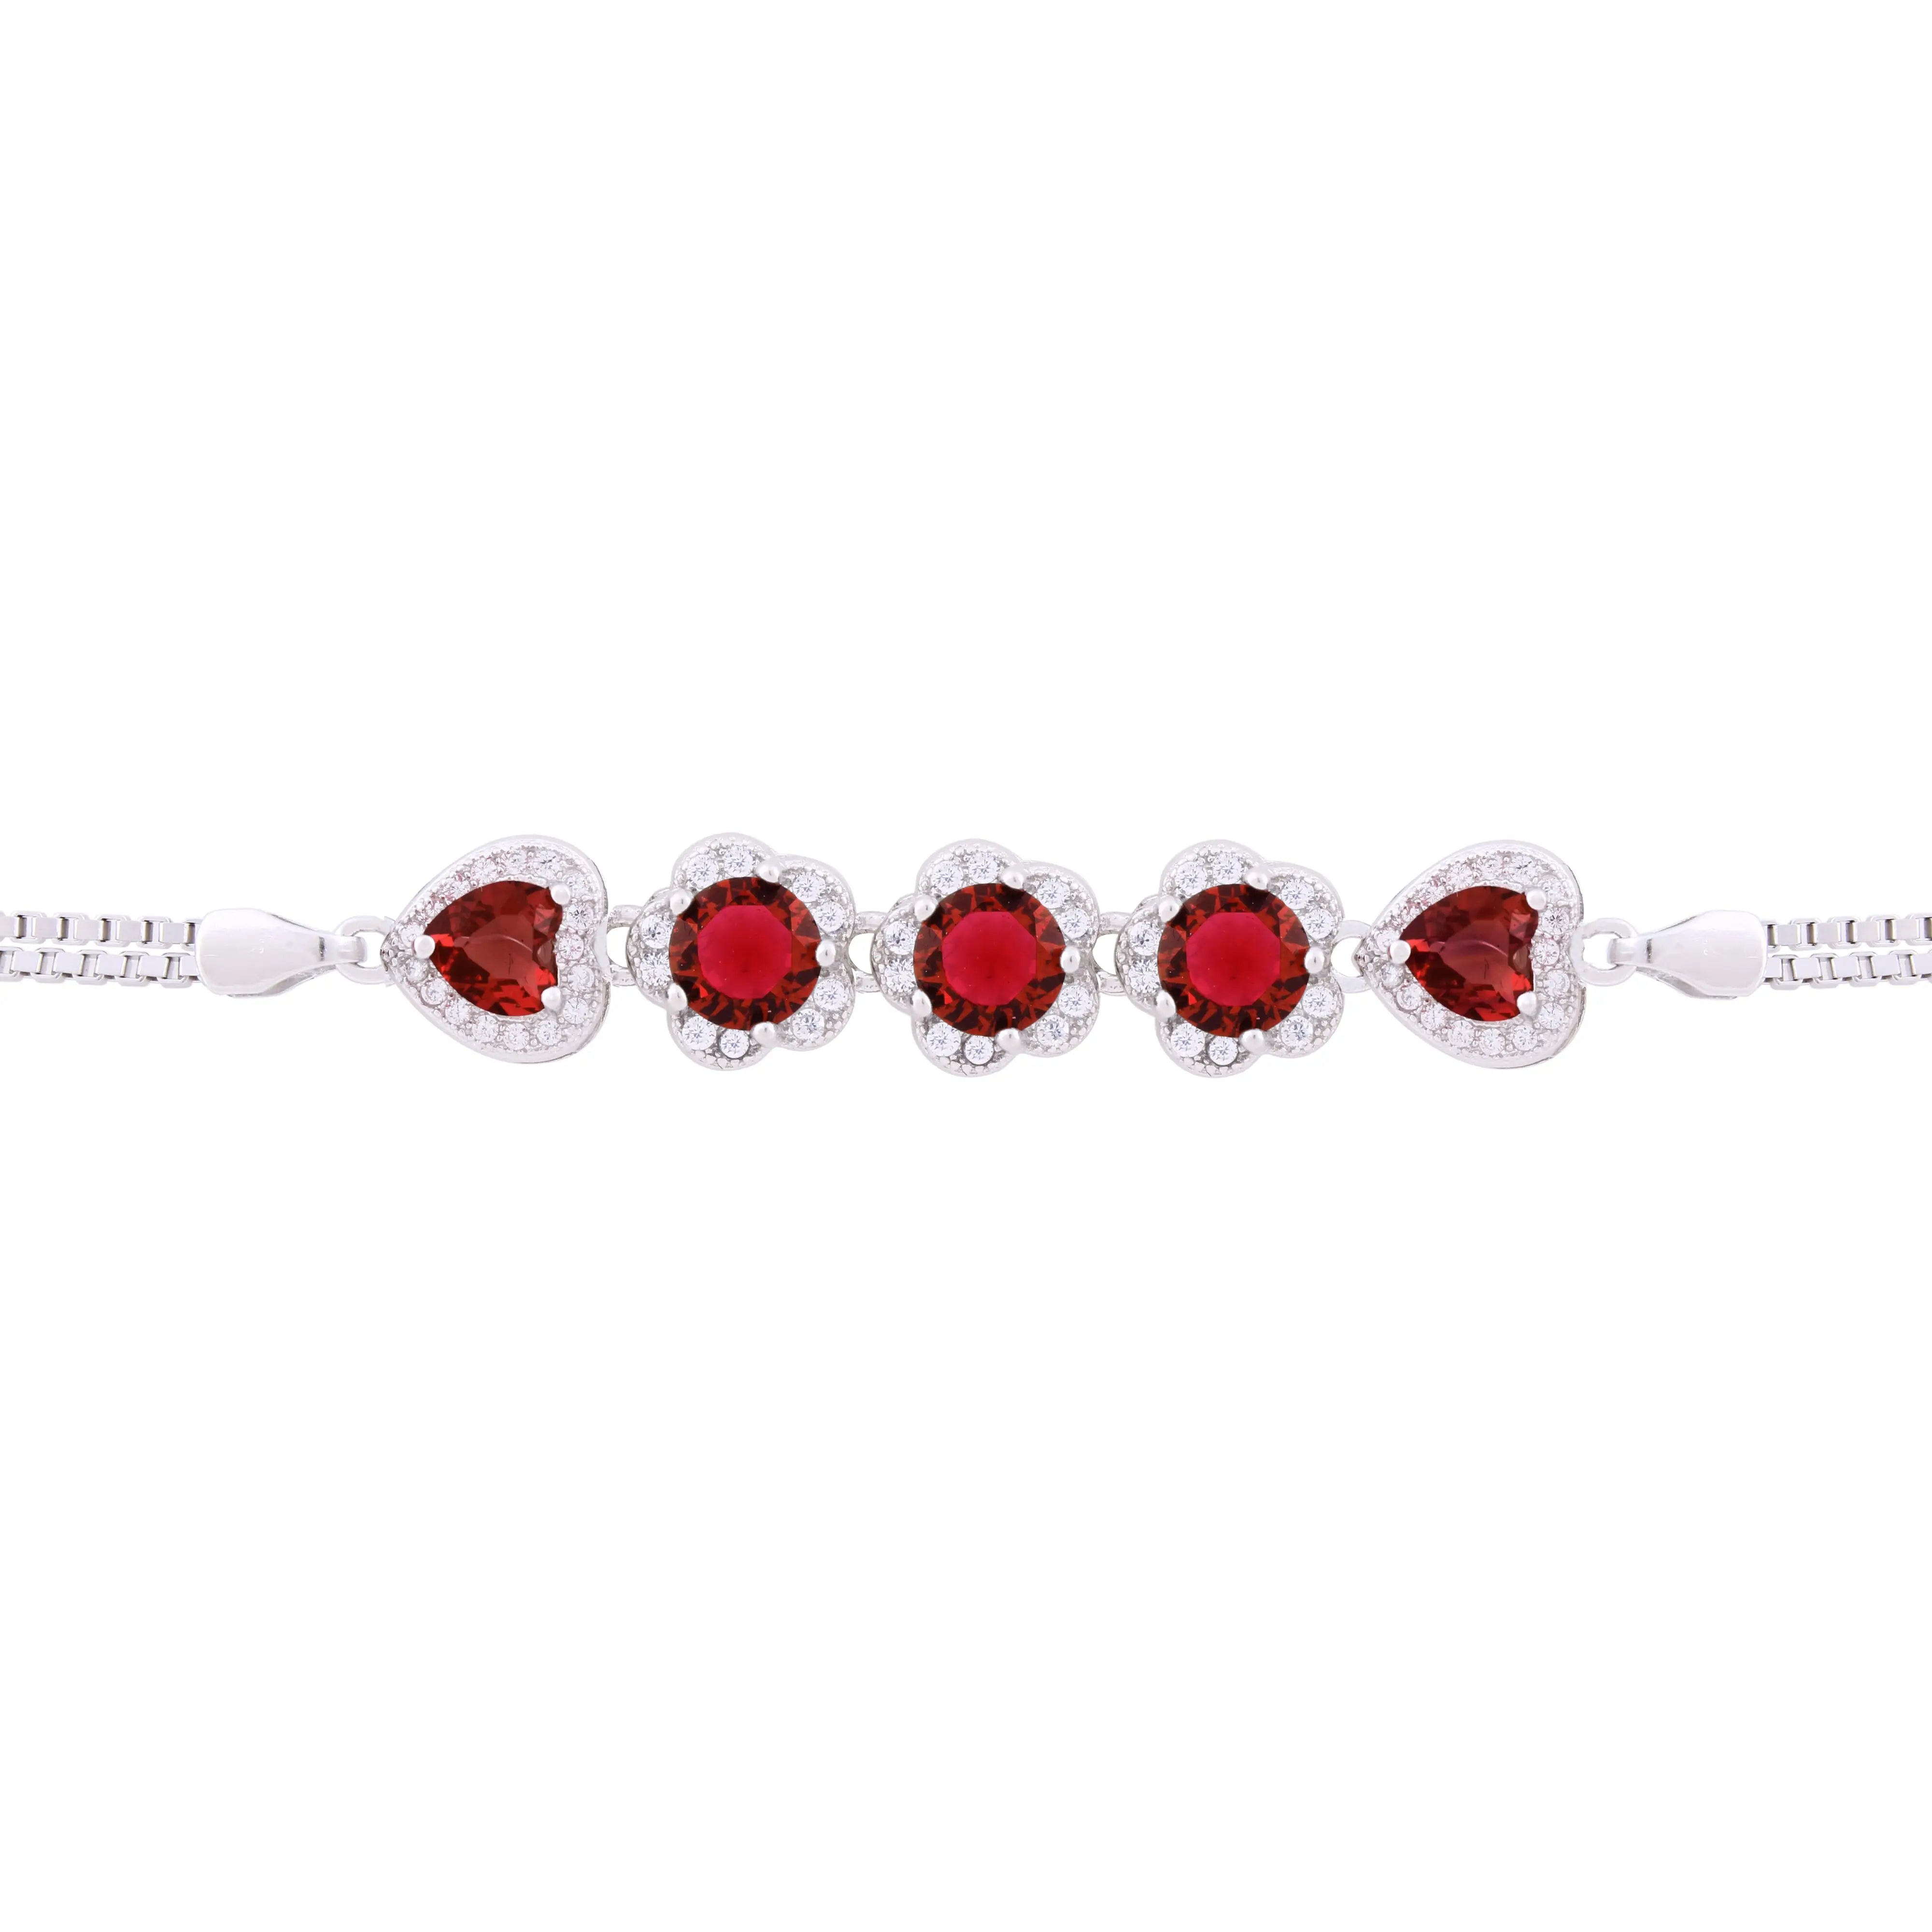 Asfour Box Chain Bracelet With Red Stones in 925 Sterling Silver